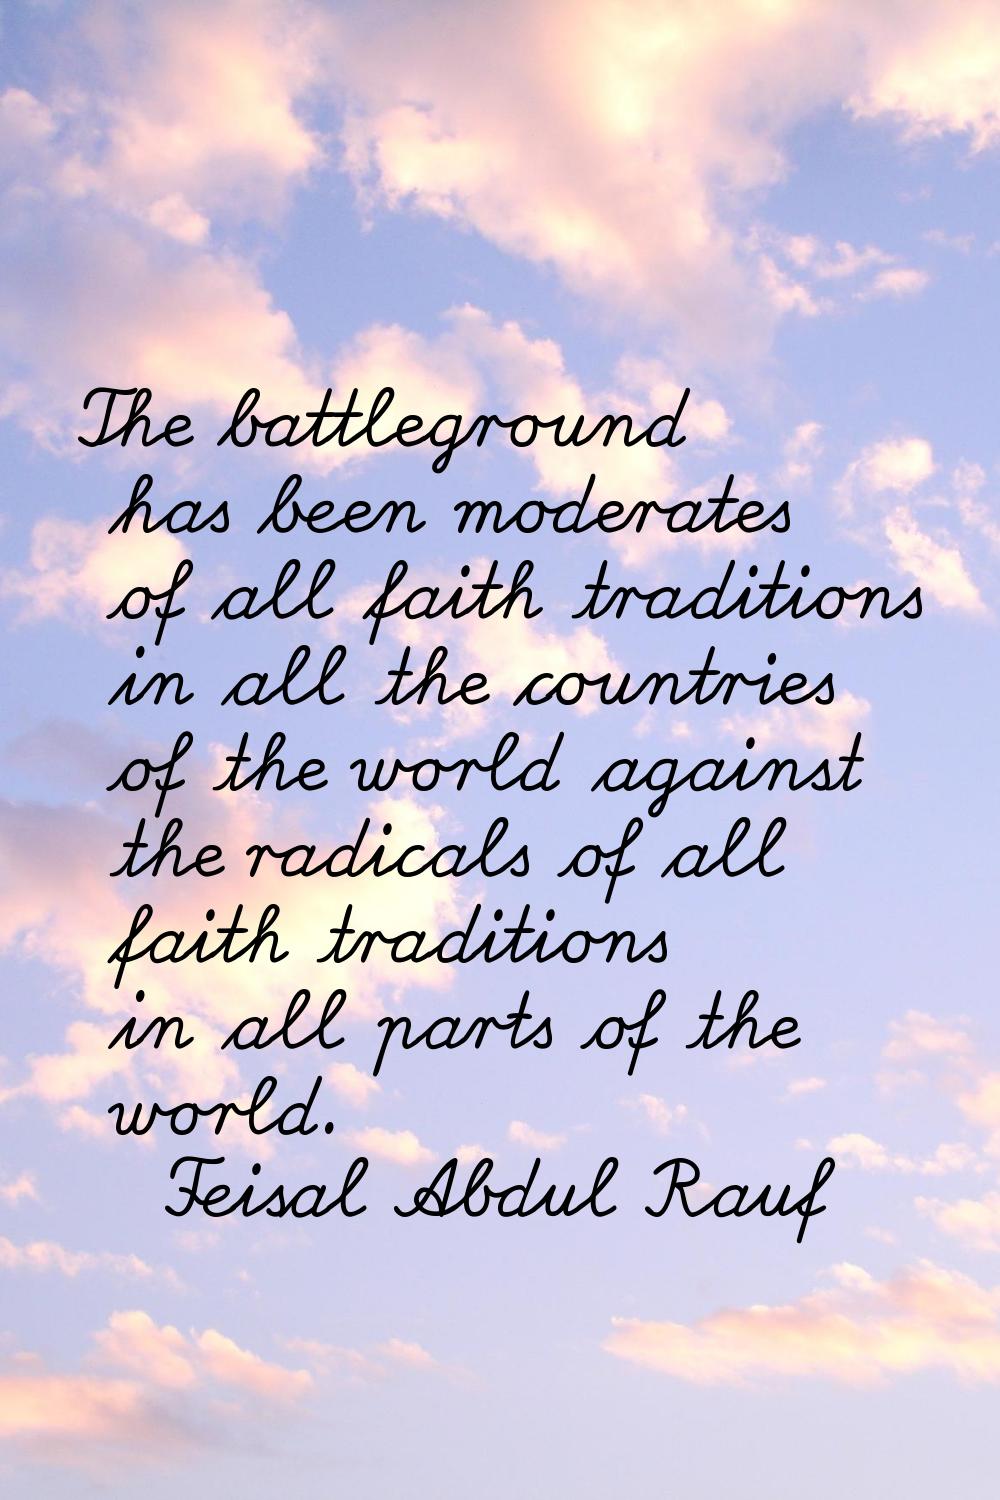 The battleground has been moderates of all faith traditions in all the countries of the world again